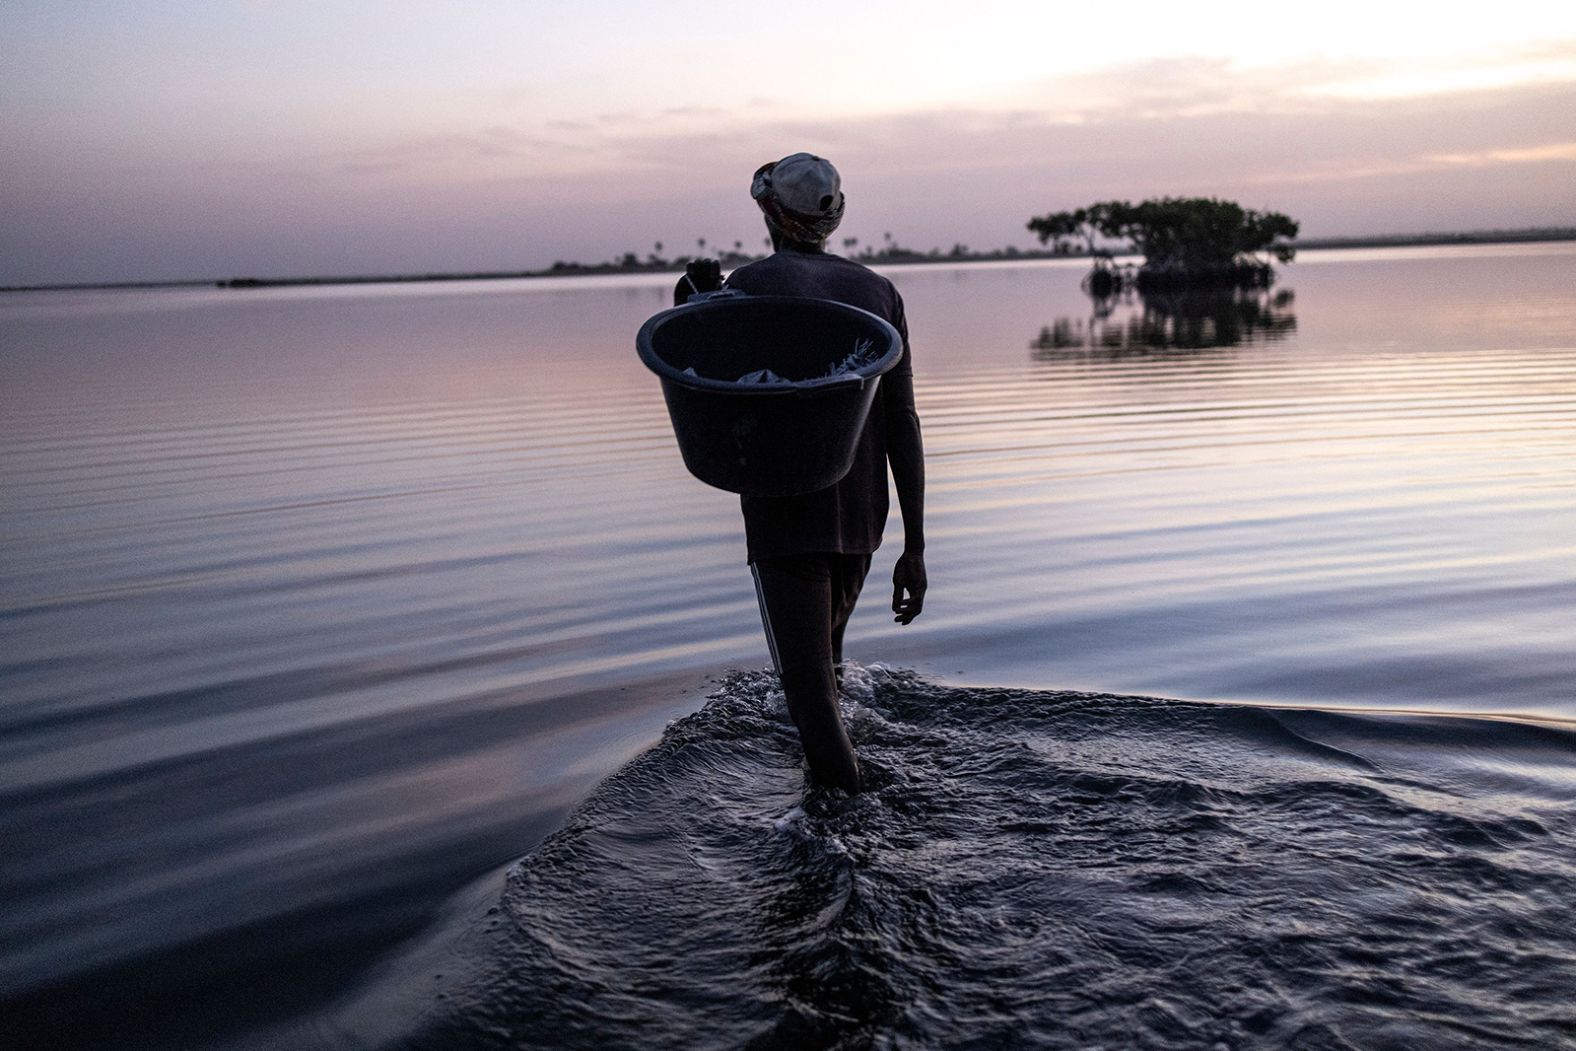 A prawn fisherman walks into the Saloum Delta ahead of a night of fishing in Simal, Senegal, on Tuesday, January 3. Prawn fishermen will spend up to three hours each night walking large distances across the delta, dragging a net to catch prawns. <a href="http://www.cnn.com/2022/12/29/world/gallery/photos-this-week-december-22-december-29/index.html" target="_blank">See last week in 36 photos</a>.